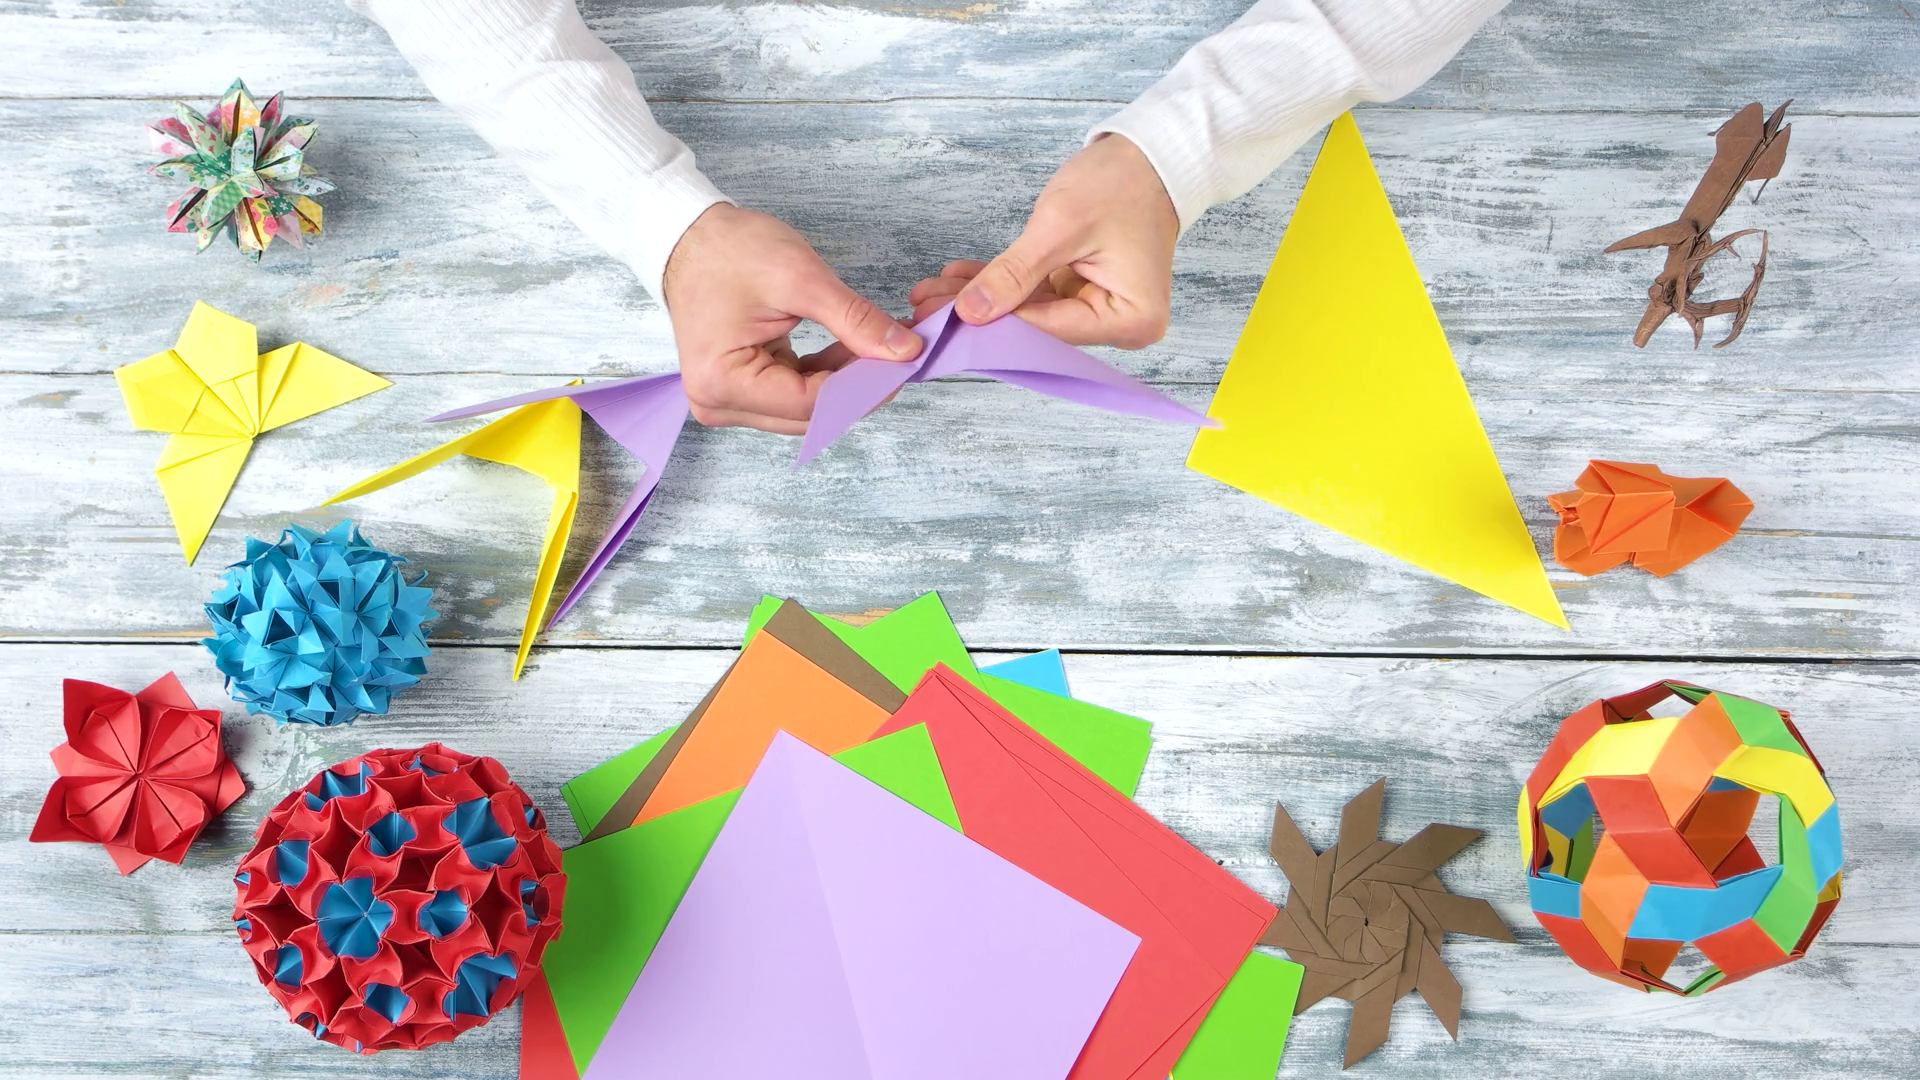 How To Make Origami Rocket Hands Doing Origami Swallows Person Making Plane From Colorful Paper How To Fold A Super Easy And Quick Origami Birds